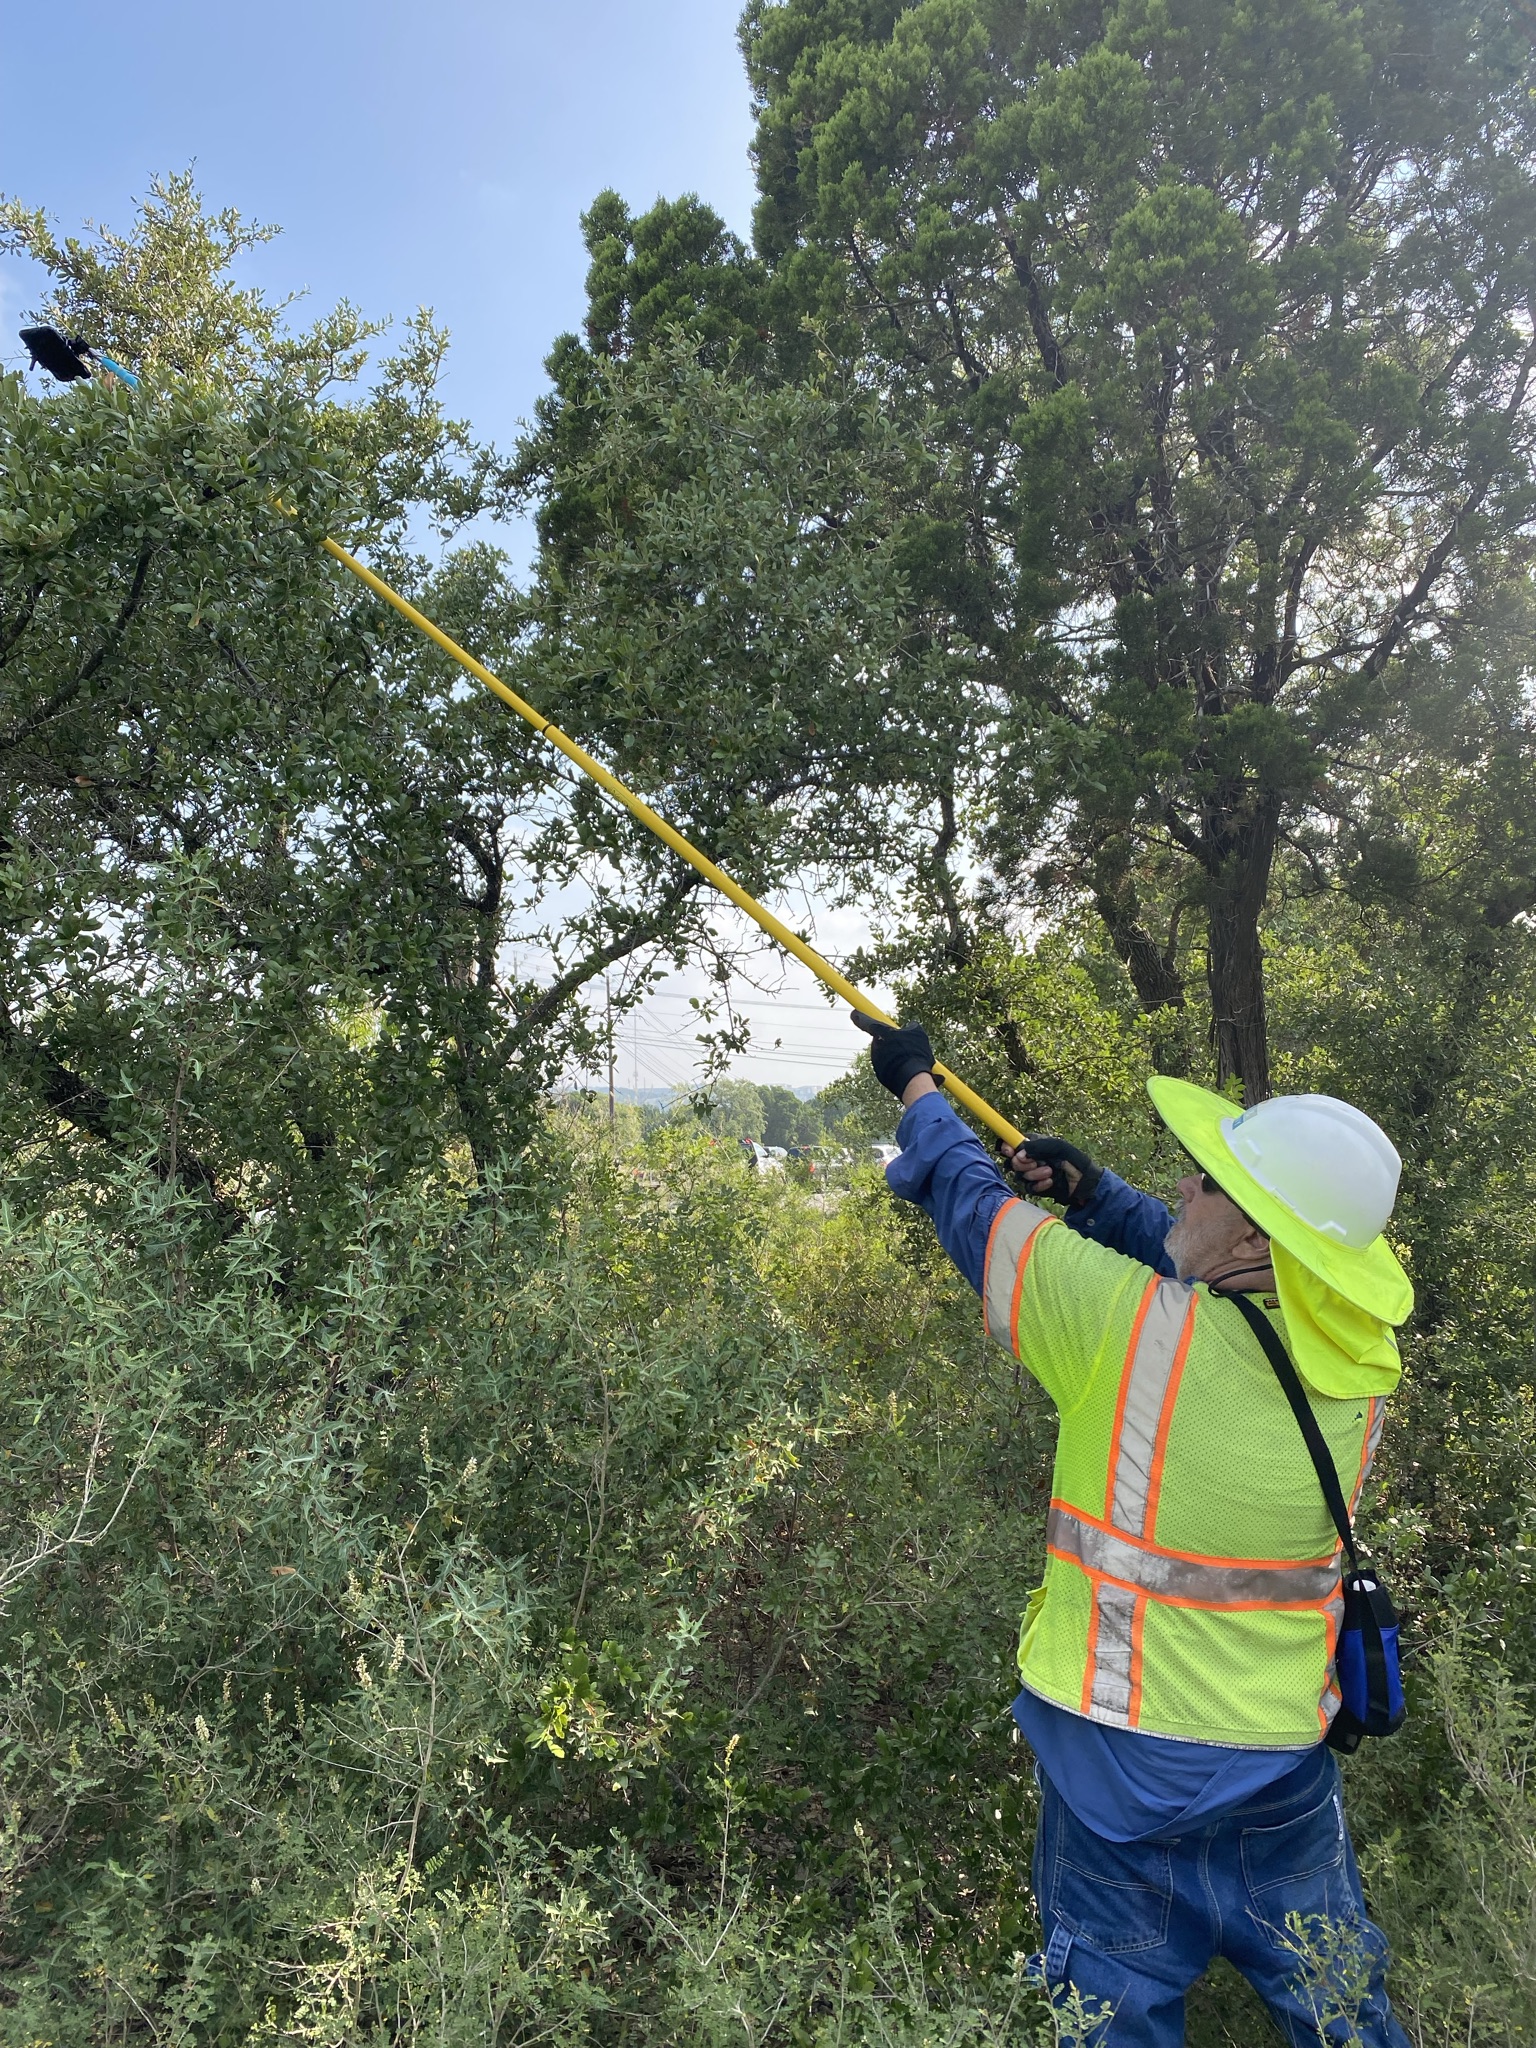 Ecologists survey for bird nests in difficult-to-access locations, such as tall trees and deep shrubbery, to ensure any active nests are identified and protected in advance of construction. September 2021